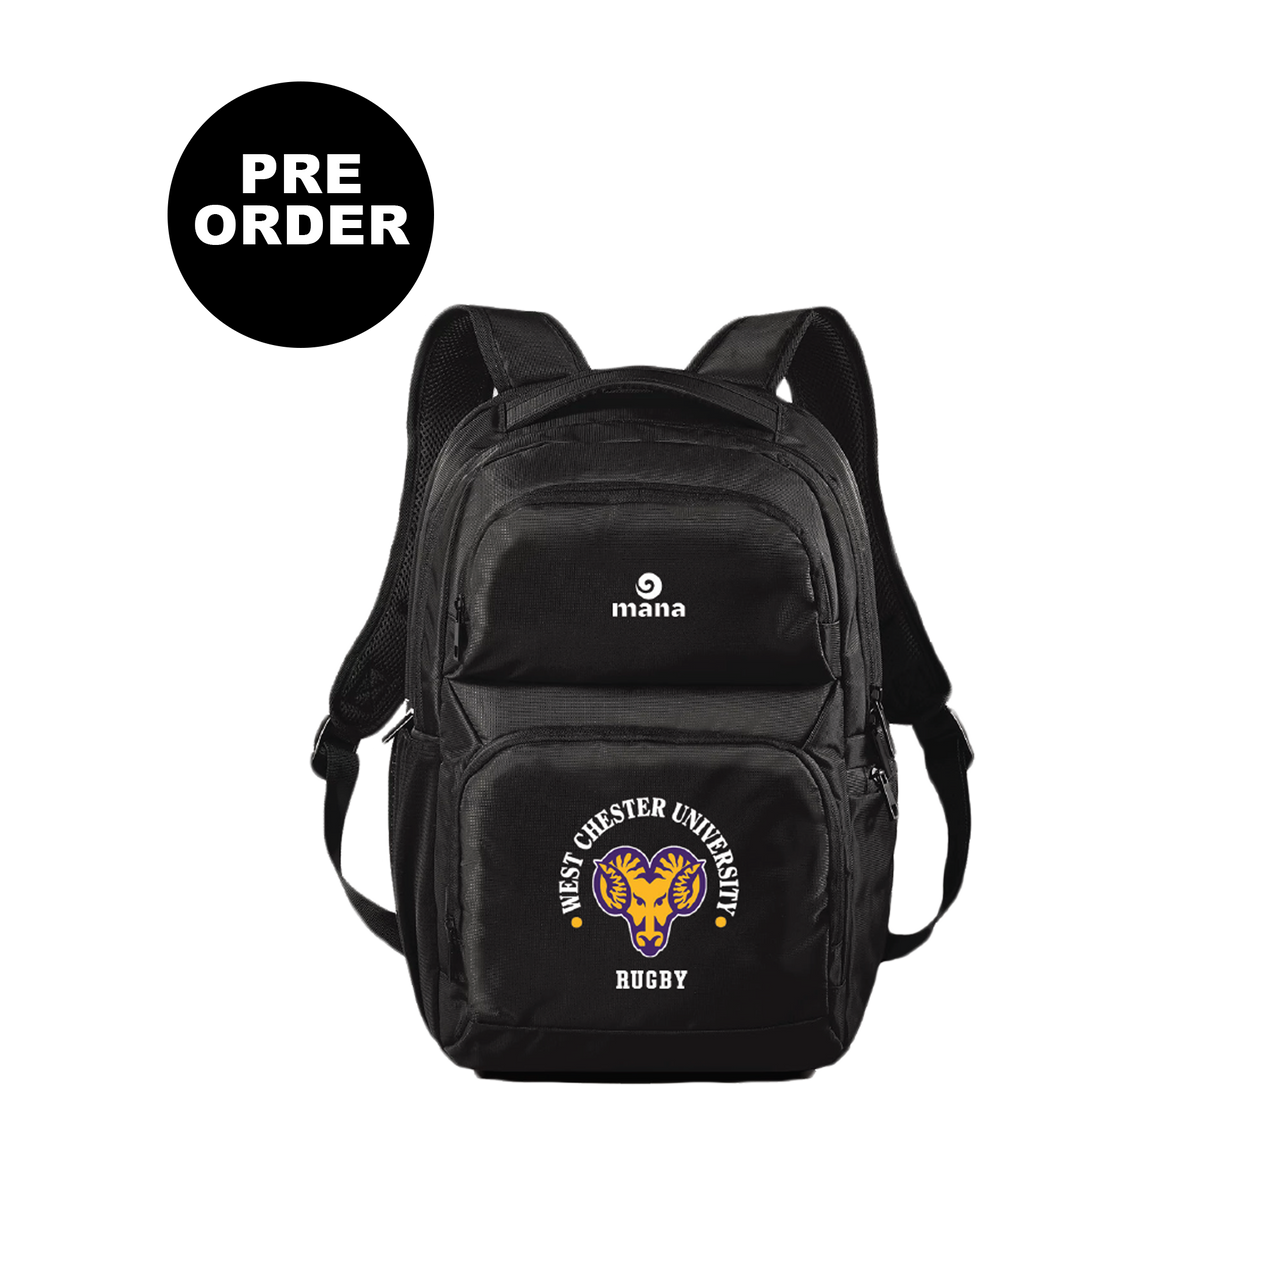 West Chester University Rugby Back Pack